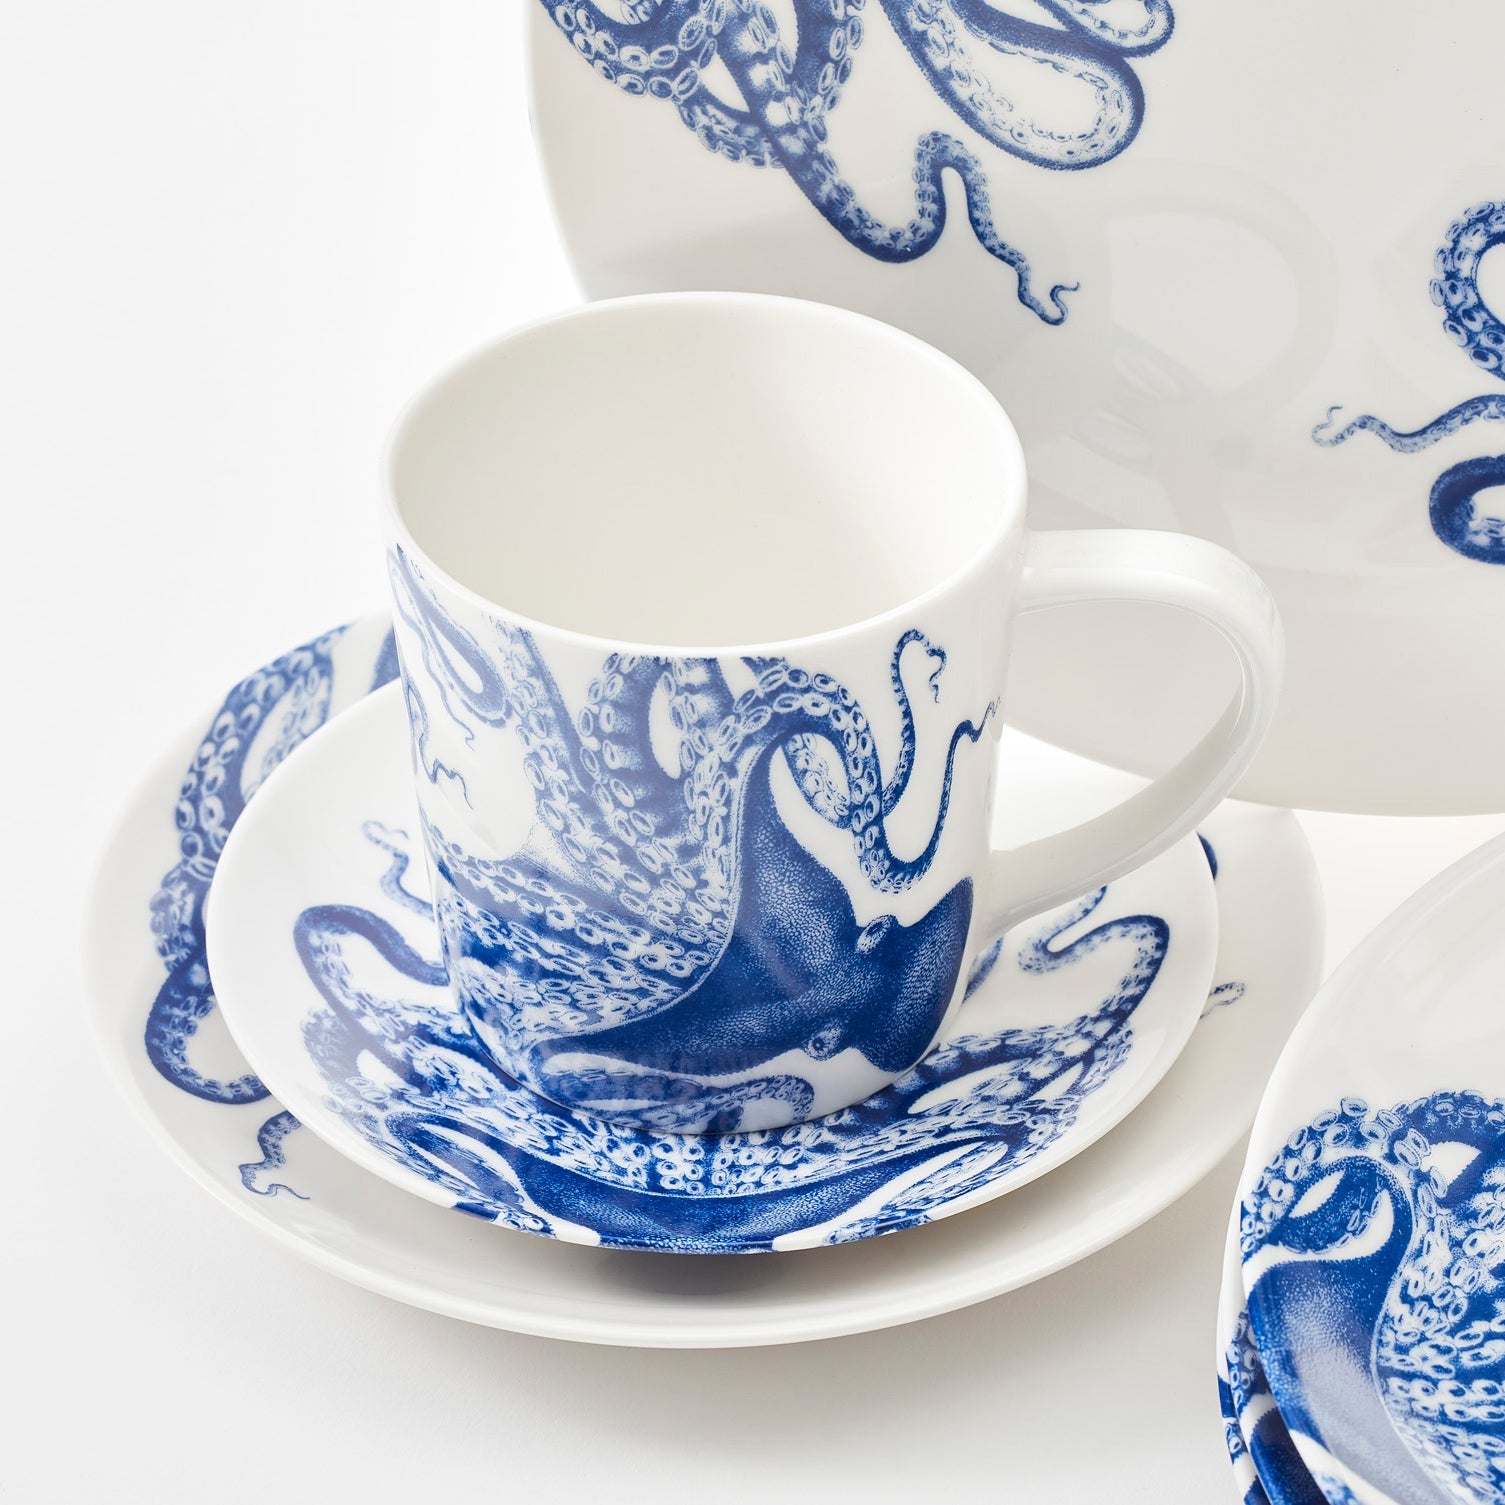 Lucy Table for 4 by Caskata blue and white porcelain dinnerware set.